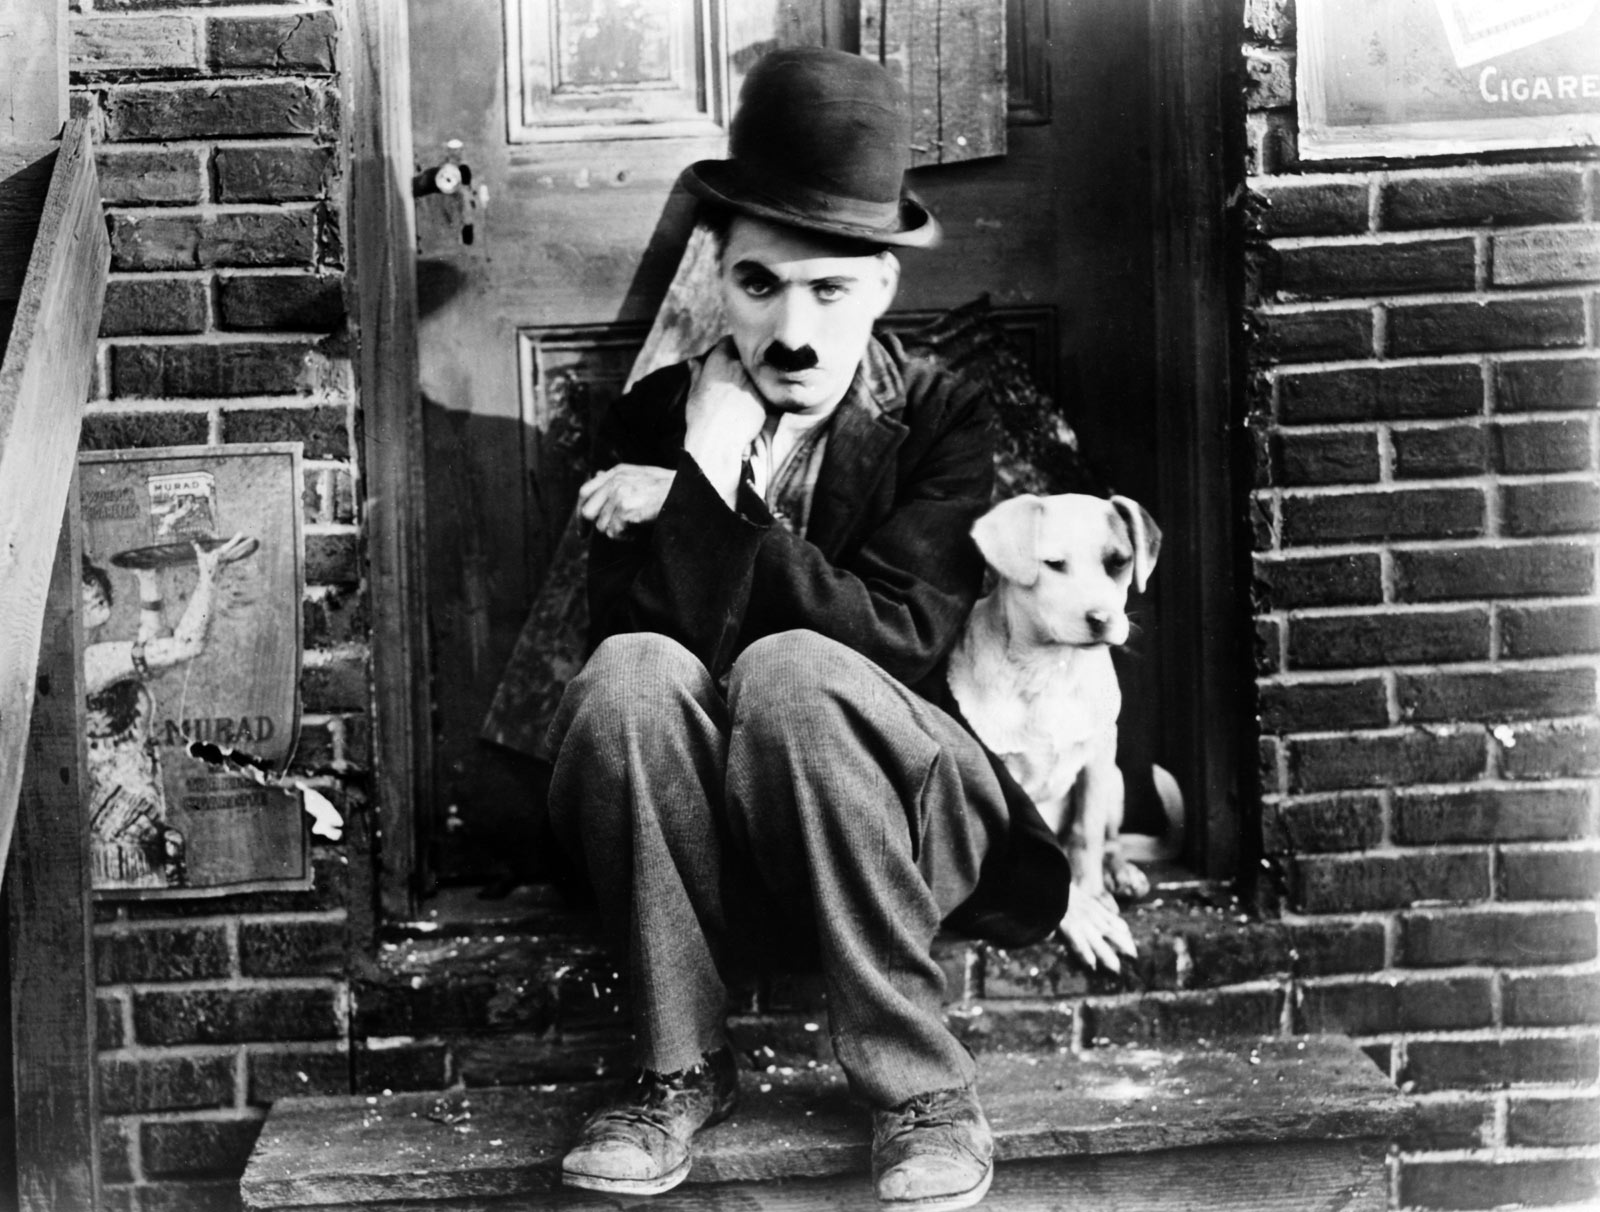 80% Of People Can’t Get 12/18 on This General Knowledge Quiz (feat. Charlie Chaplin) — Can You? Charlie Chaplin The Tramp